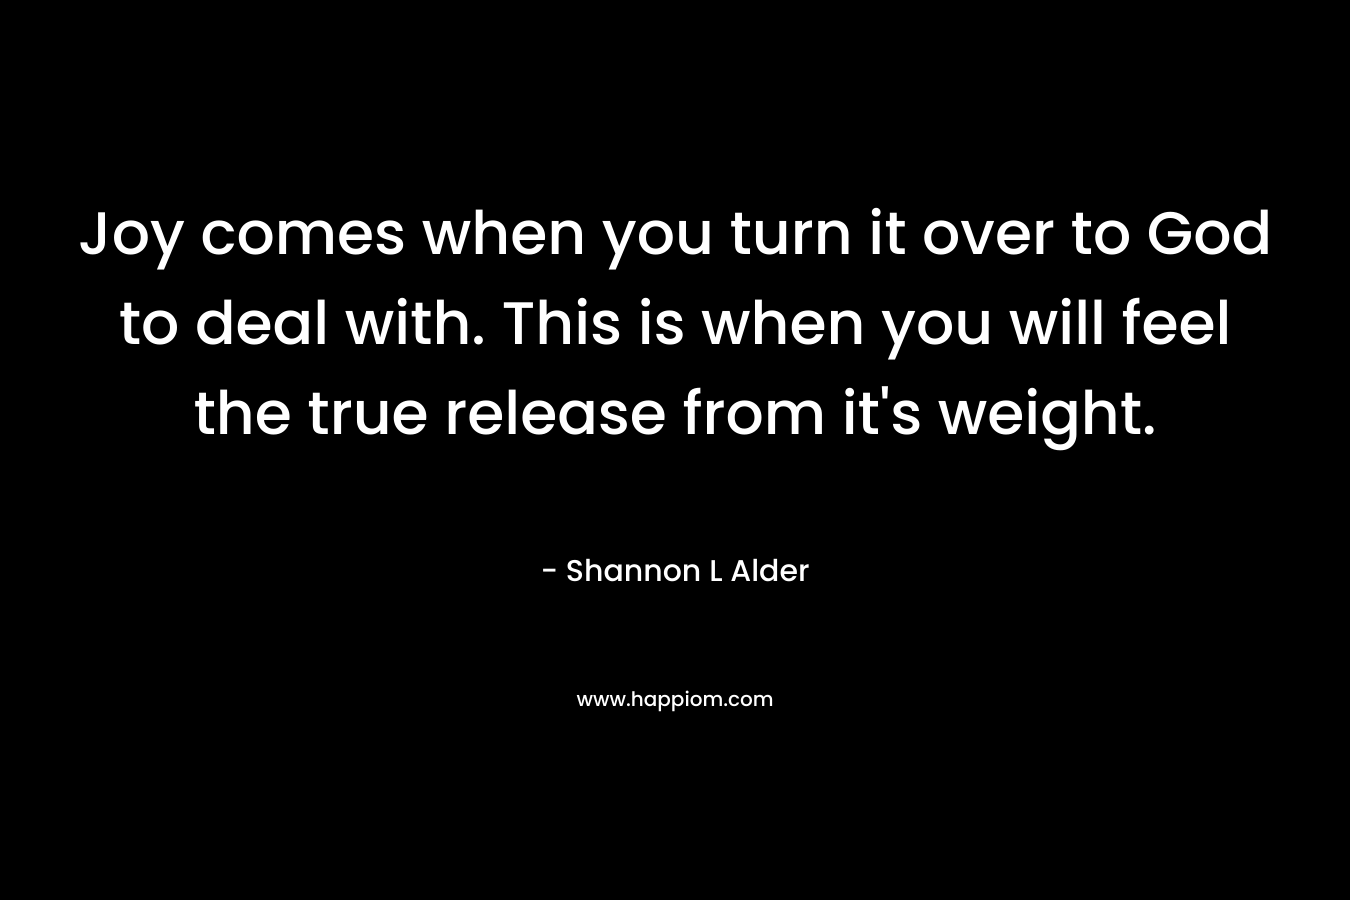 Joy comes when you turn it over to God to deal with. This is when you will feel the true release from it's weight.